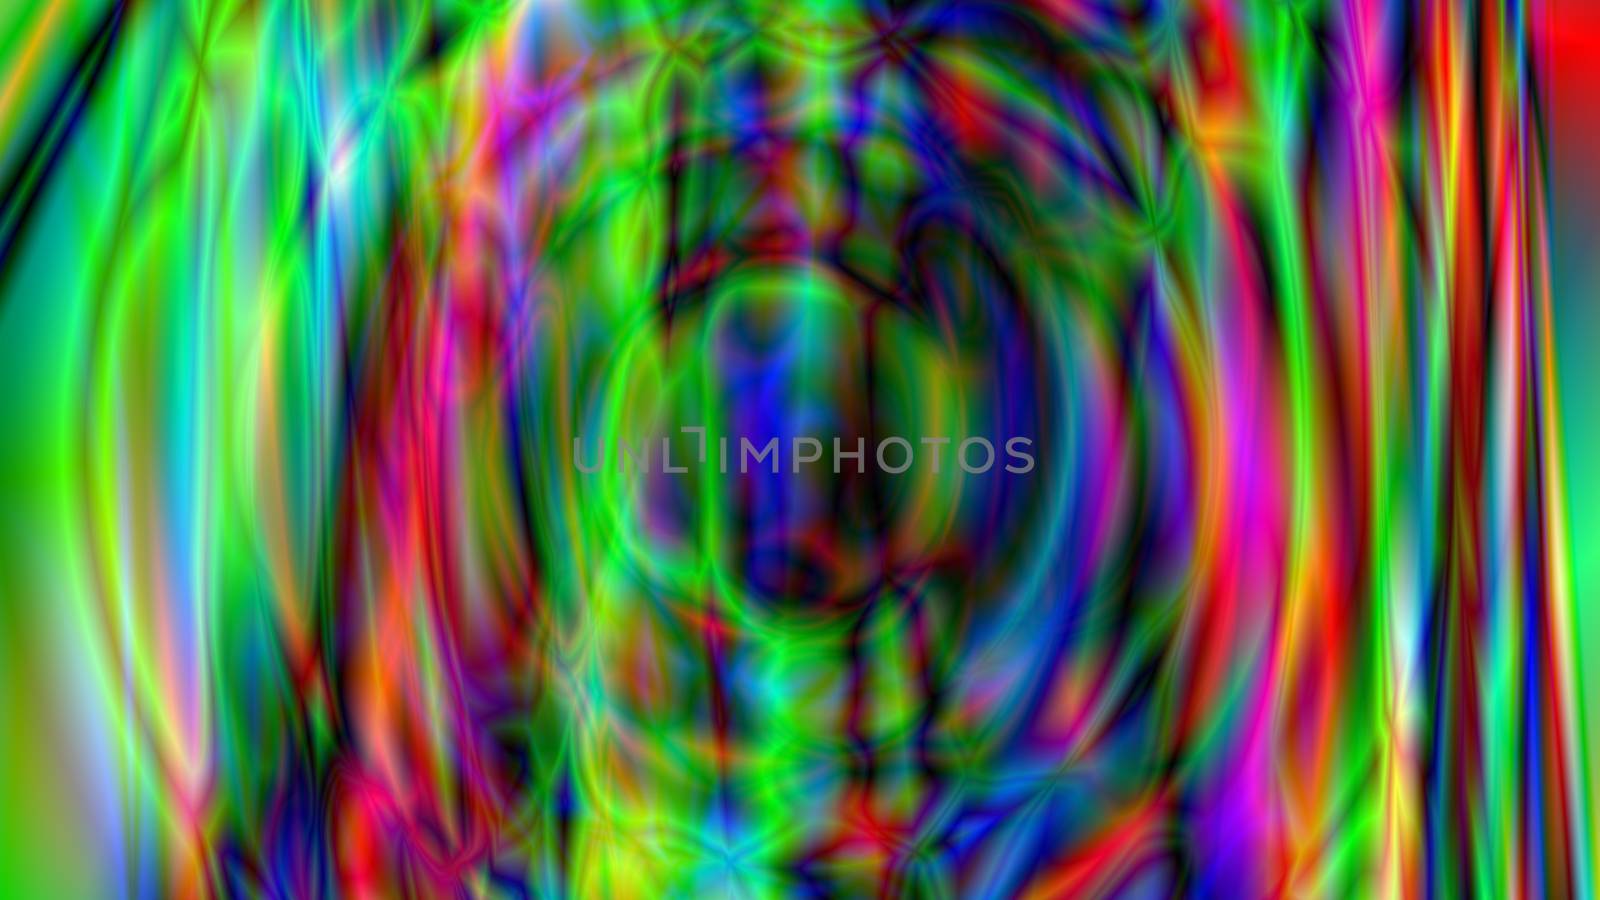 Abstract background with psychedelic art. 3d rendering